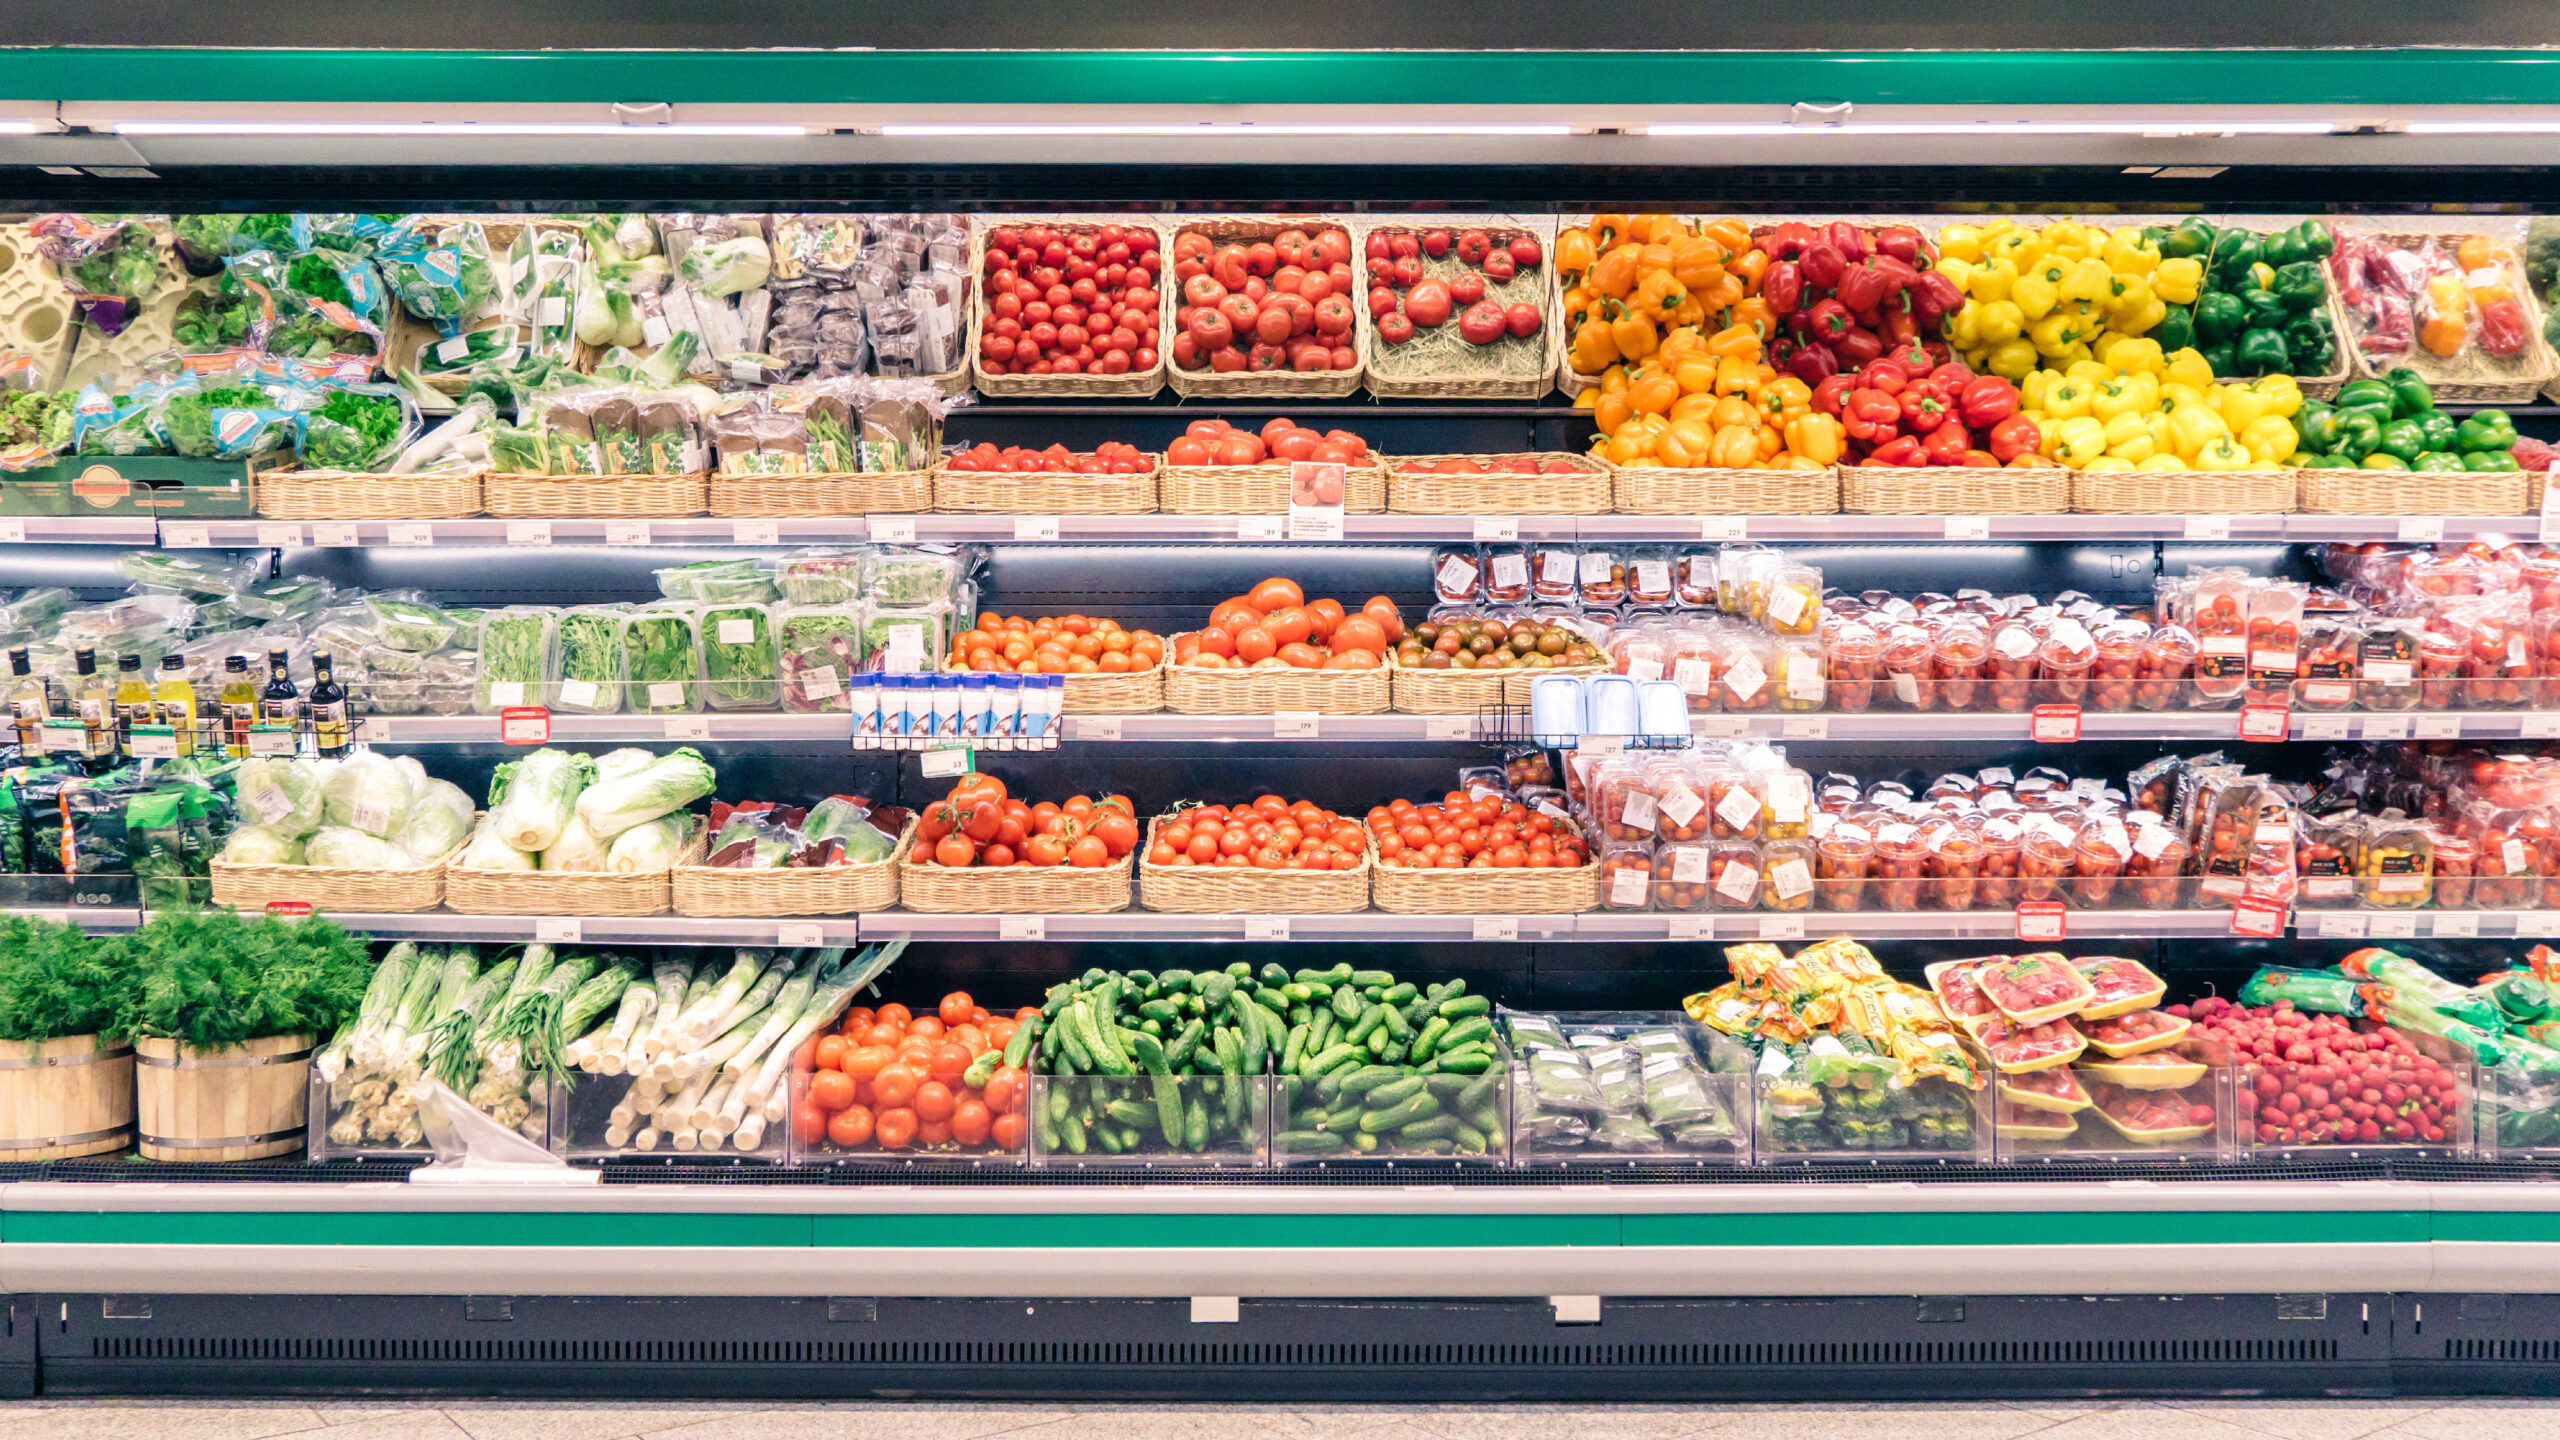 Eating in America Today - produce shelves in grocery store